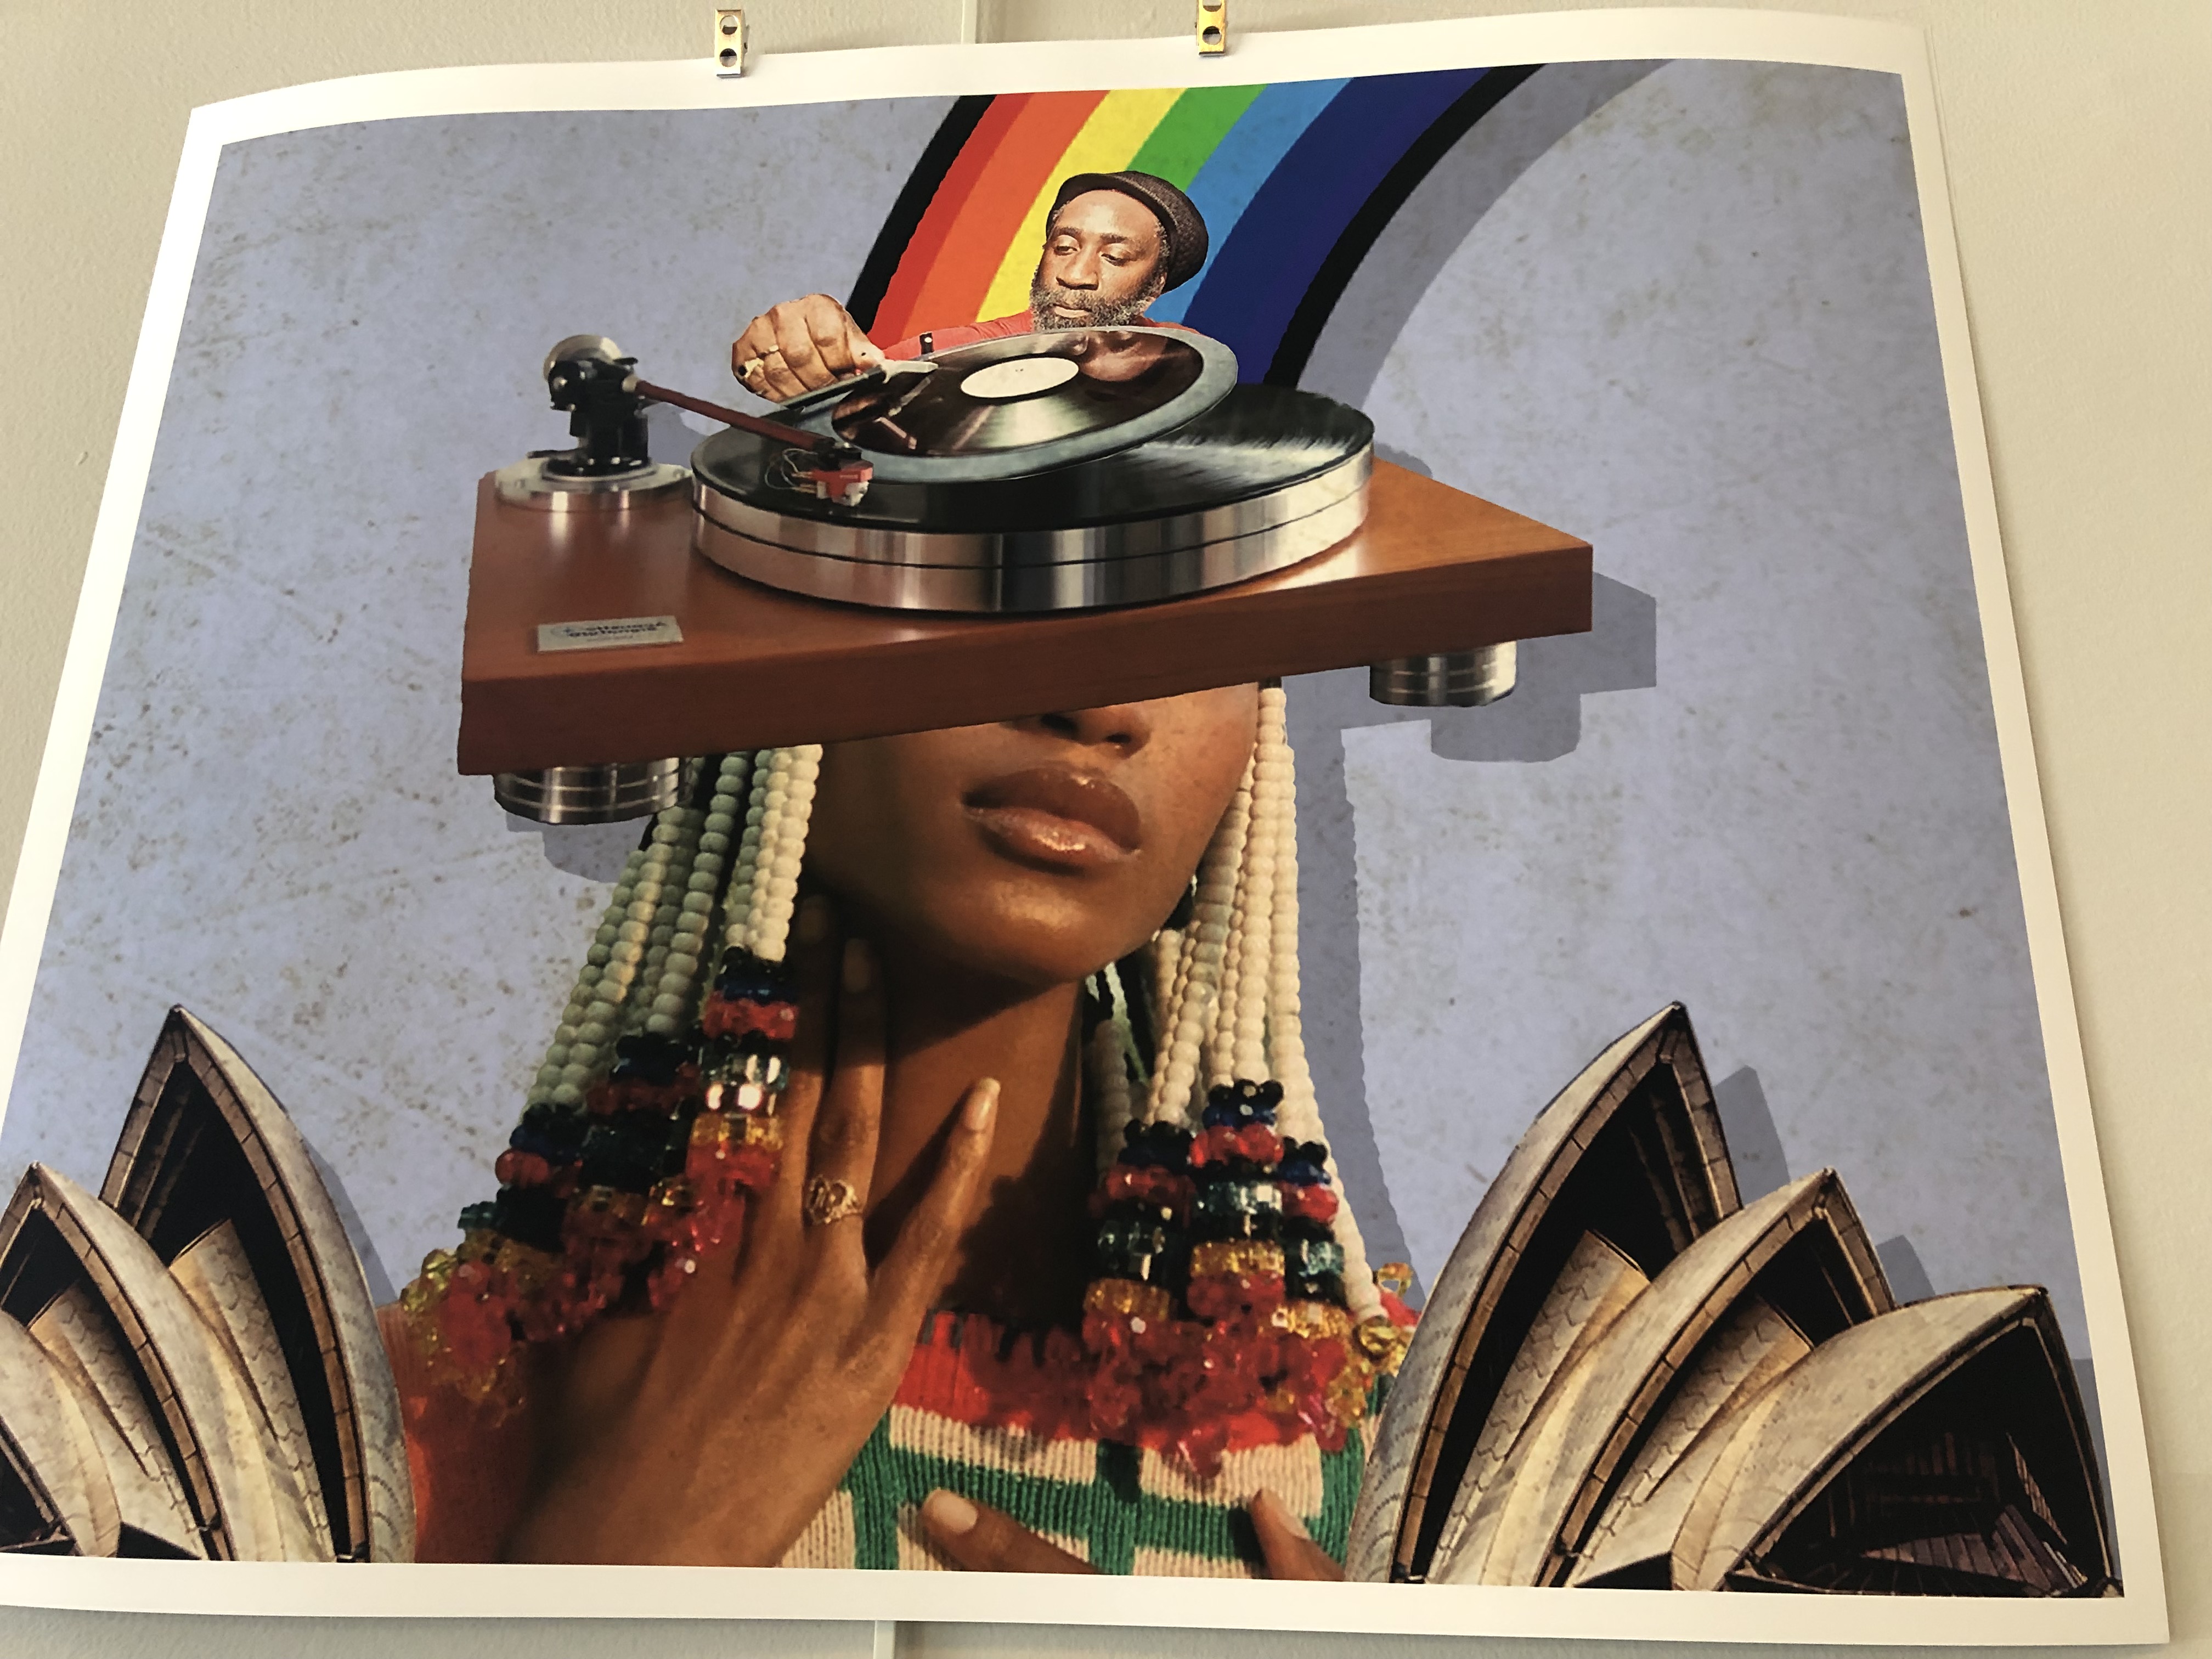 Artistic image of a Black woman with a DJ spinning records out of her head and an image of a rainbow bursting forth on the top. Kamau Grantham and Stacey Robinson, Selection of Her Thoughts (aka Her Mind Spins), Digital Collage, Â© 2021. Photo by Amy Penne.